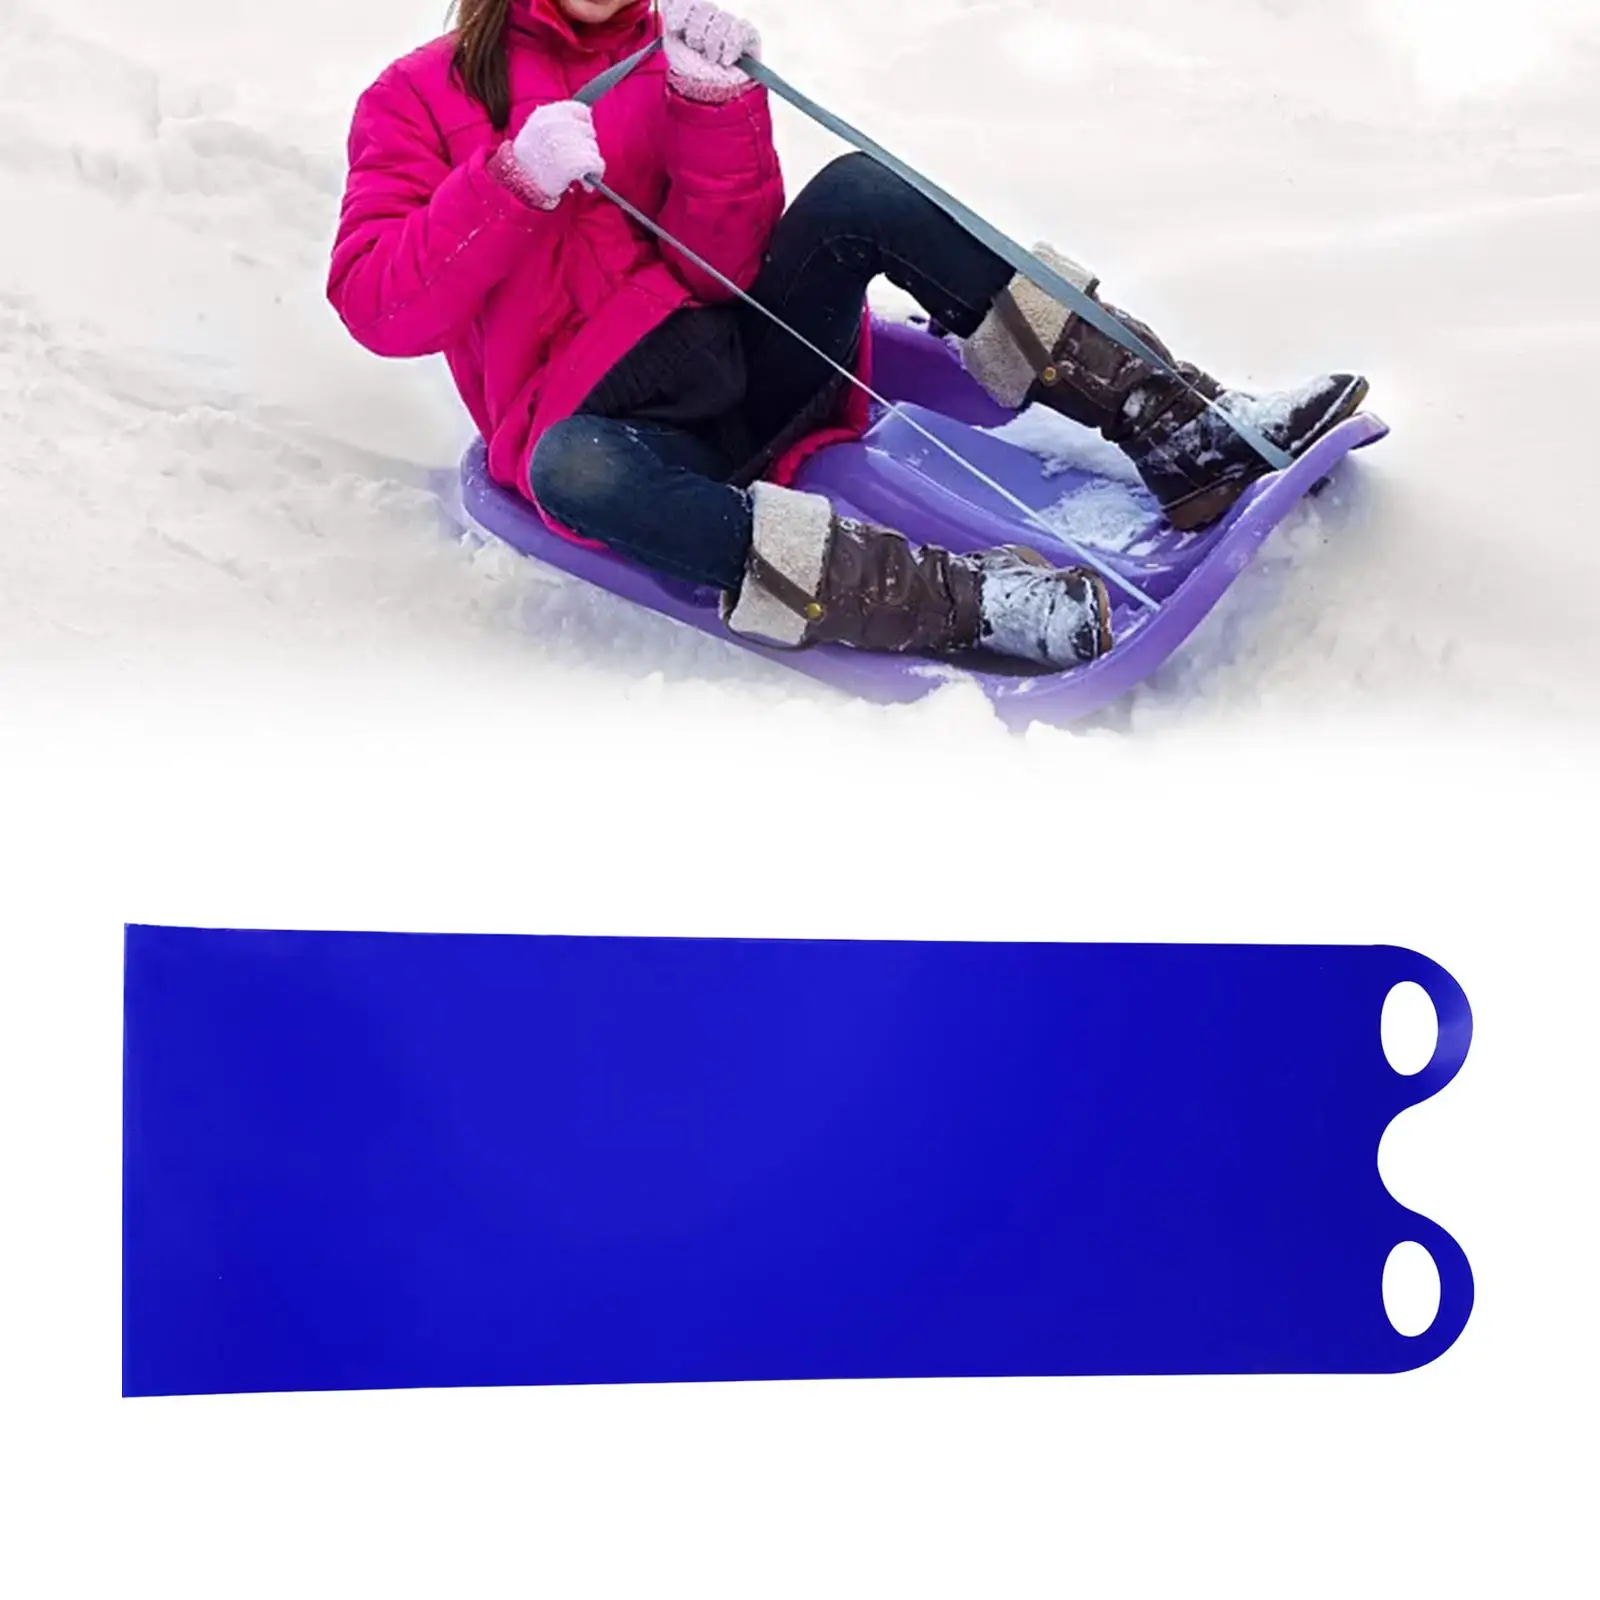 Snow Slide Mat Flying Carpet Snow Sled Roll up Sled for Skiing Winter Toy Outdoor Fun